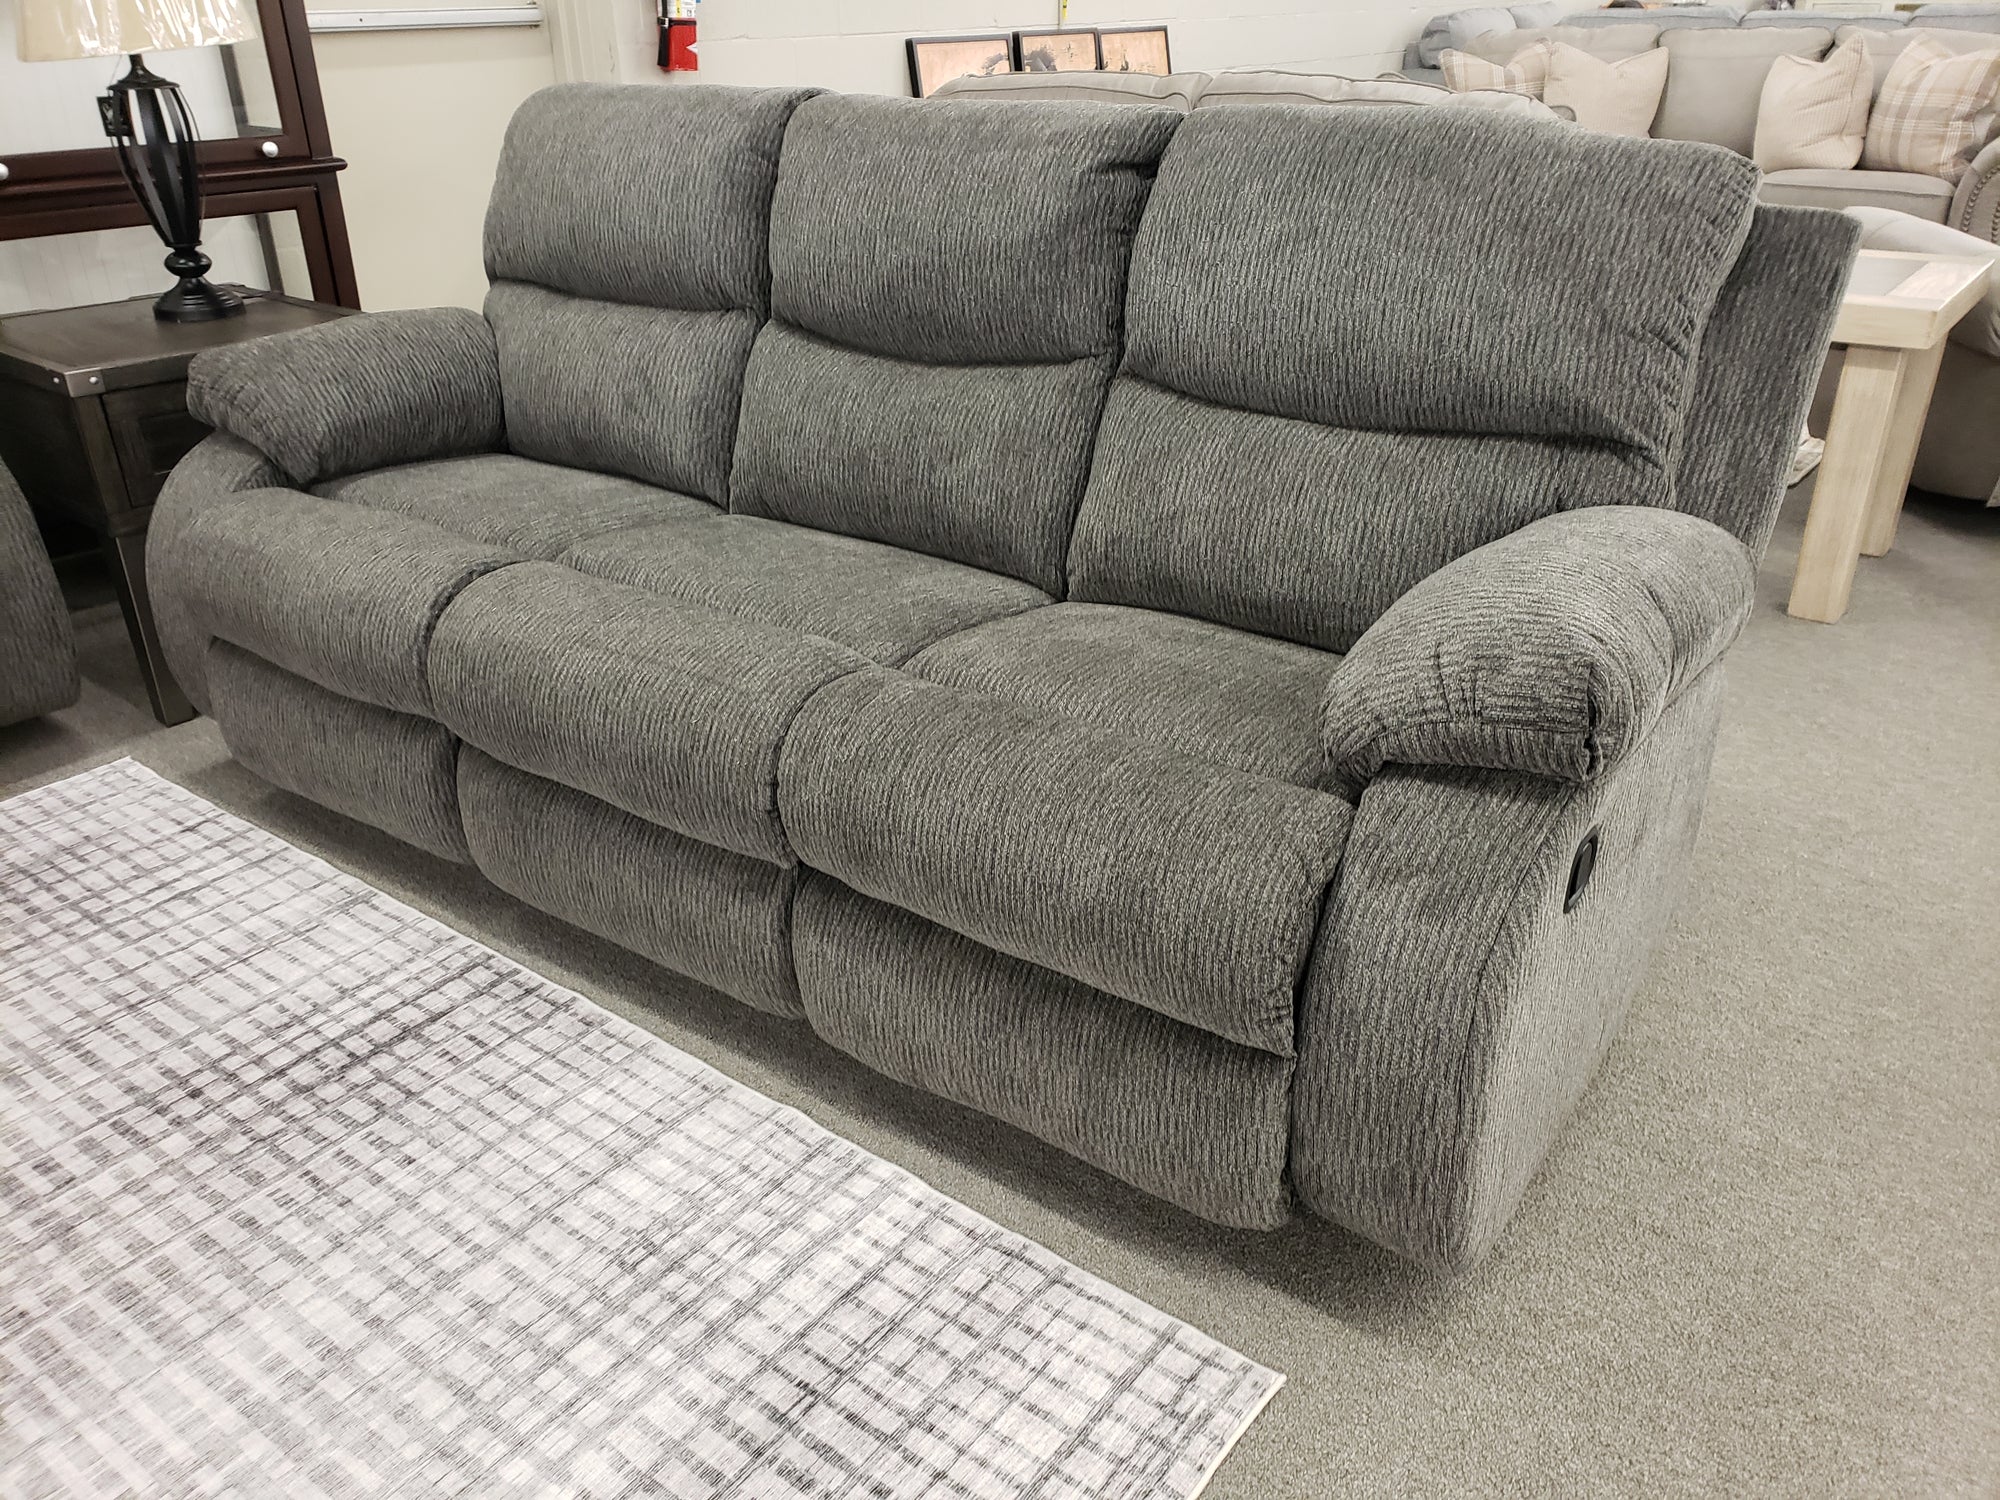 776 FI-A Reclining Sofa And Loveseat